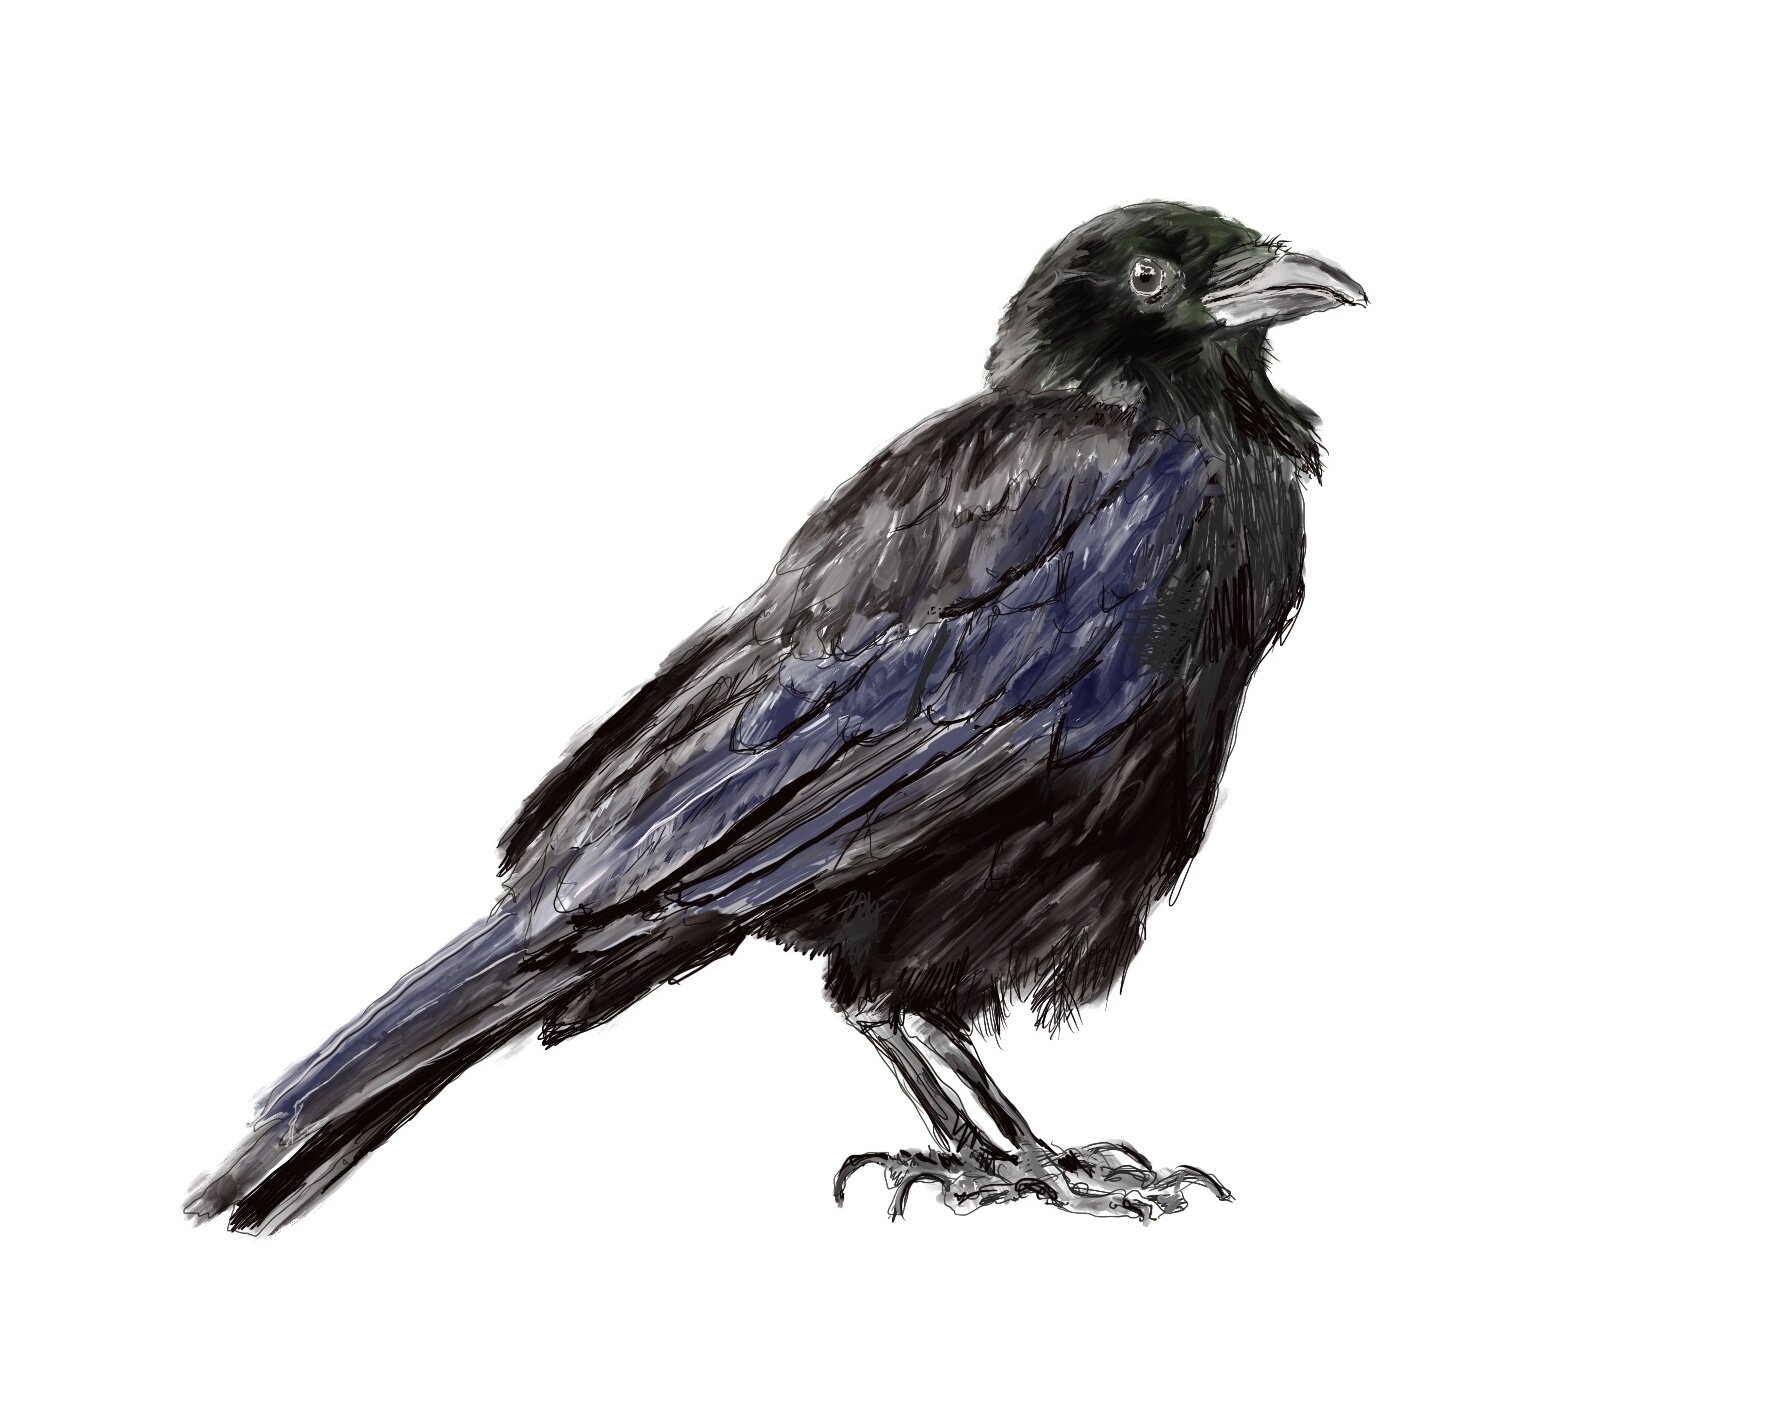 Crow; 2021; painted with Procreate